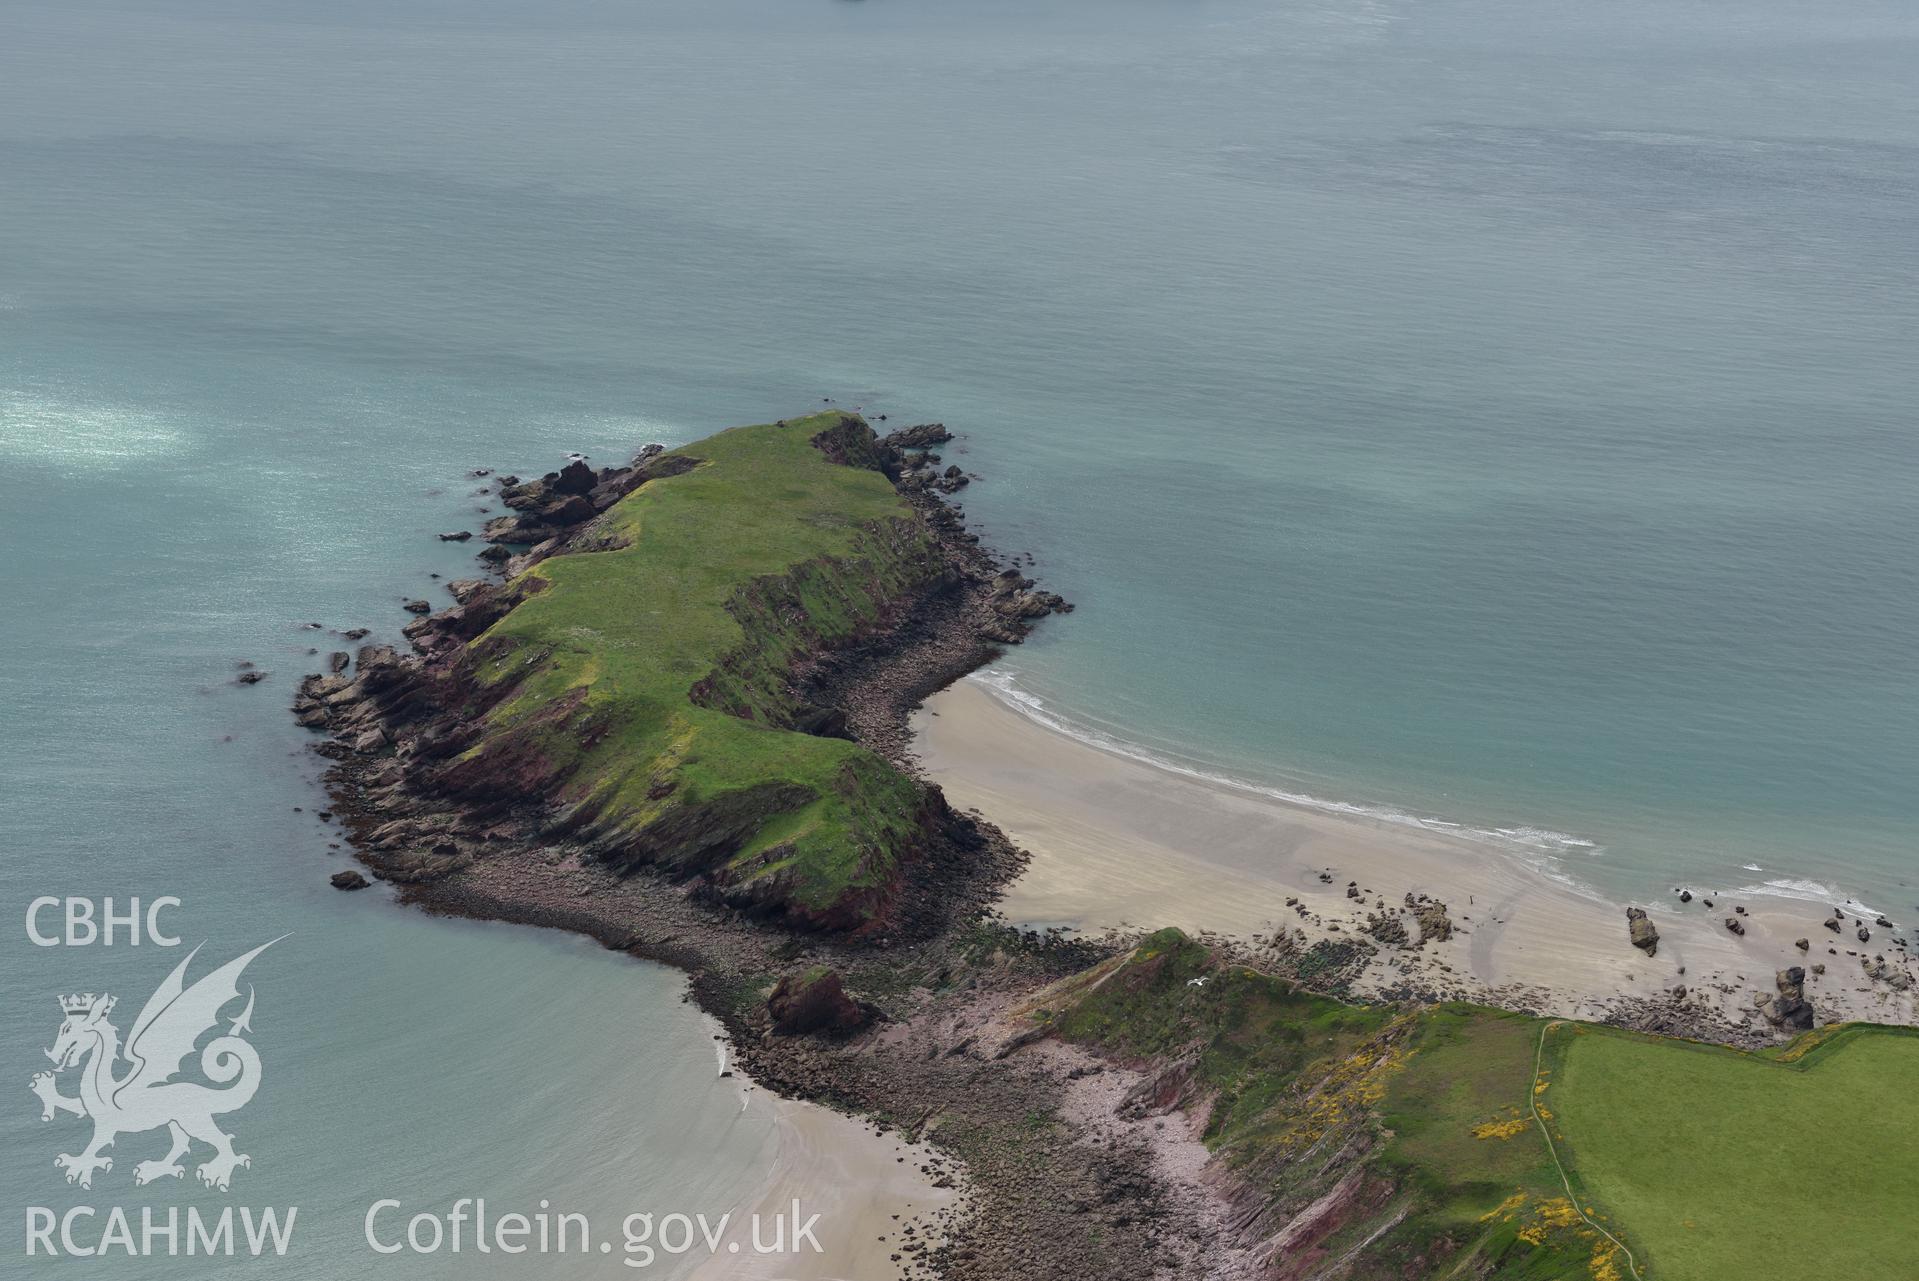 Gateholm Island at extreme low tide. Baseline aerial reconnaissance survey for the CHERISH Project. ? Crown: CHERISH PROJECT 2017. Produced with EU funds through the Ireland Wales Co-operation Programme 2014-2020. All material made freely available through the Open Government Licence.